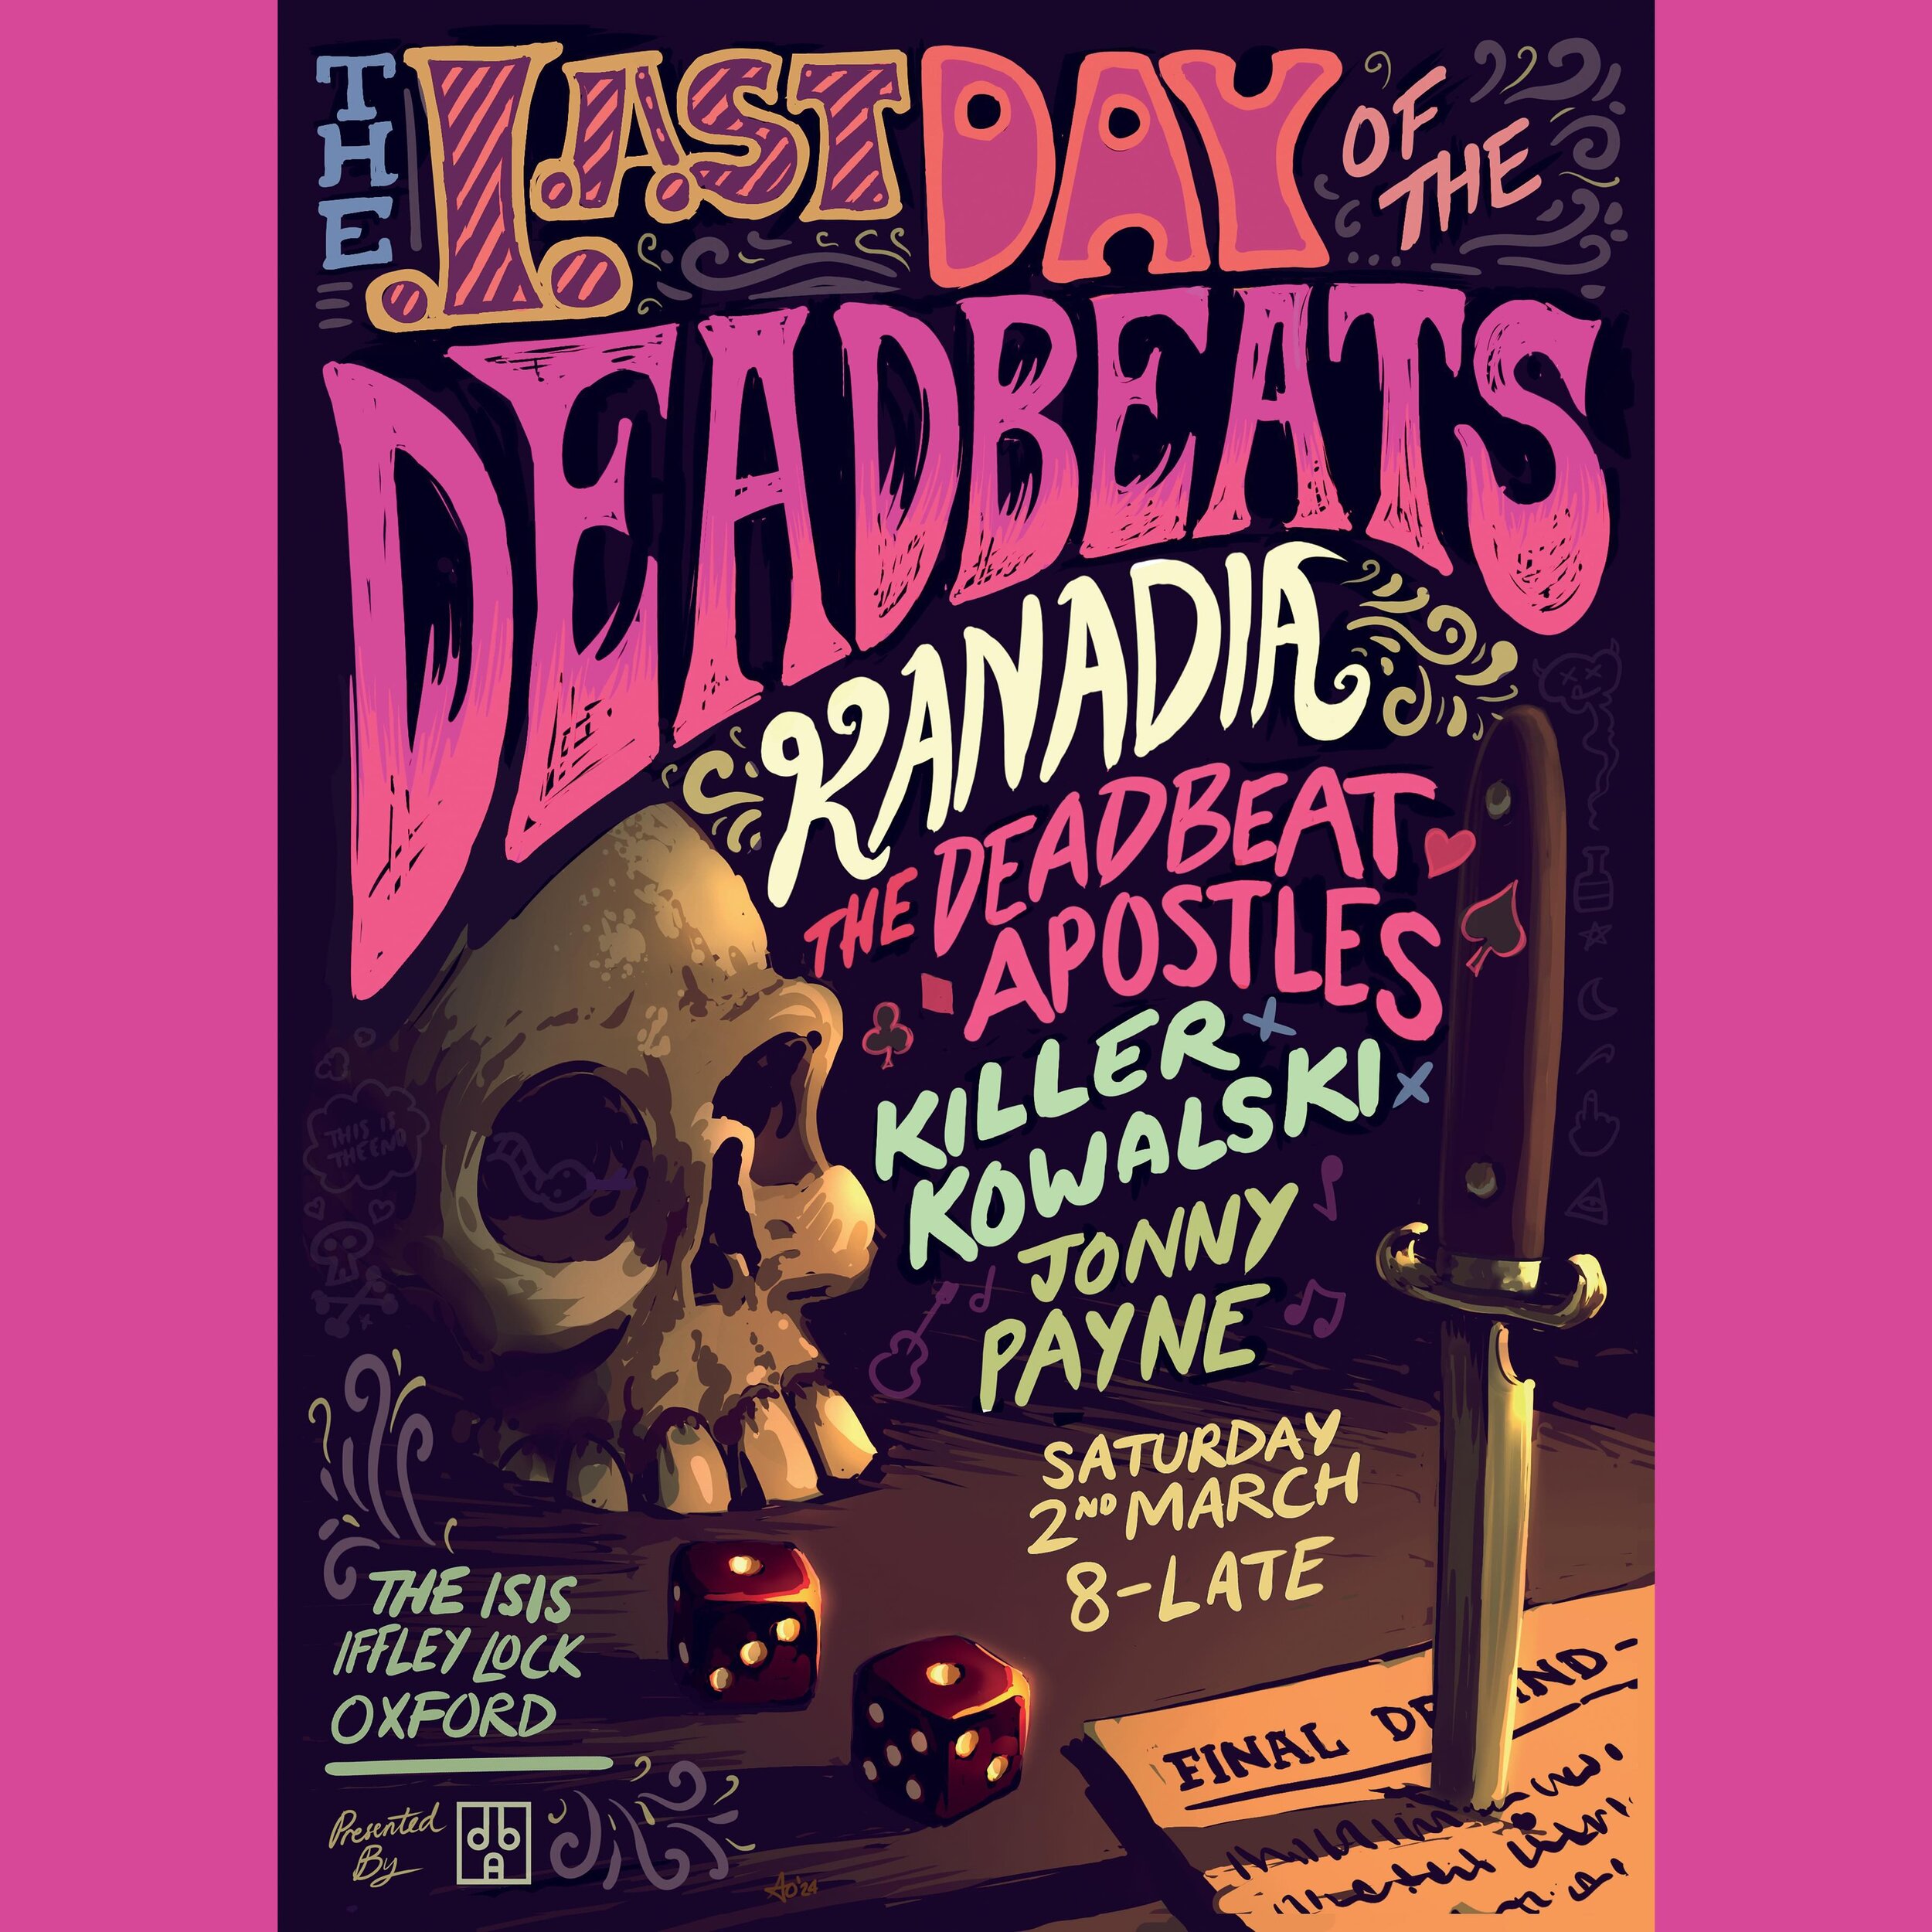 Tomorrow night! The last Day Of The Deadbeats! 💀
Just look at that poster as well. 
@thedeadbeatapostles 
@kanadiaband 
@killer_kowalski__